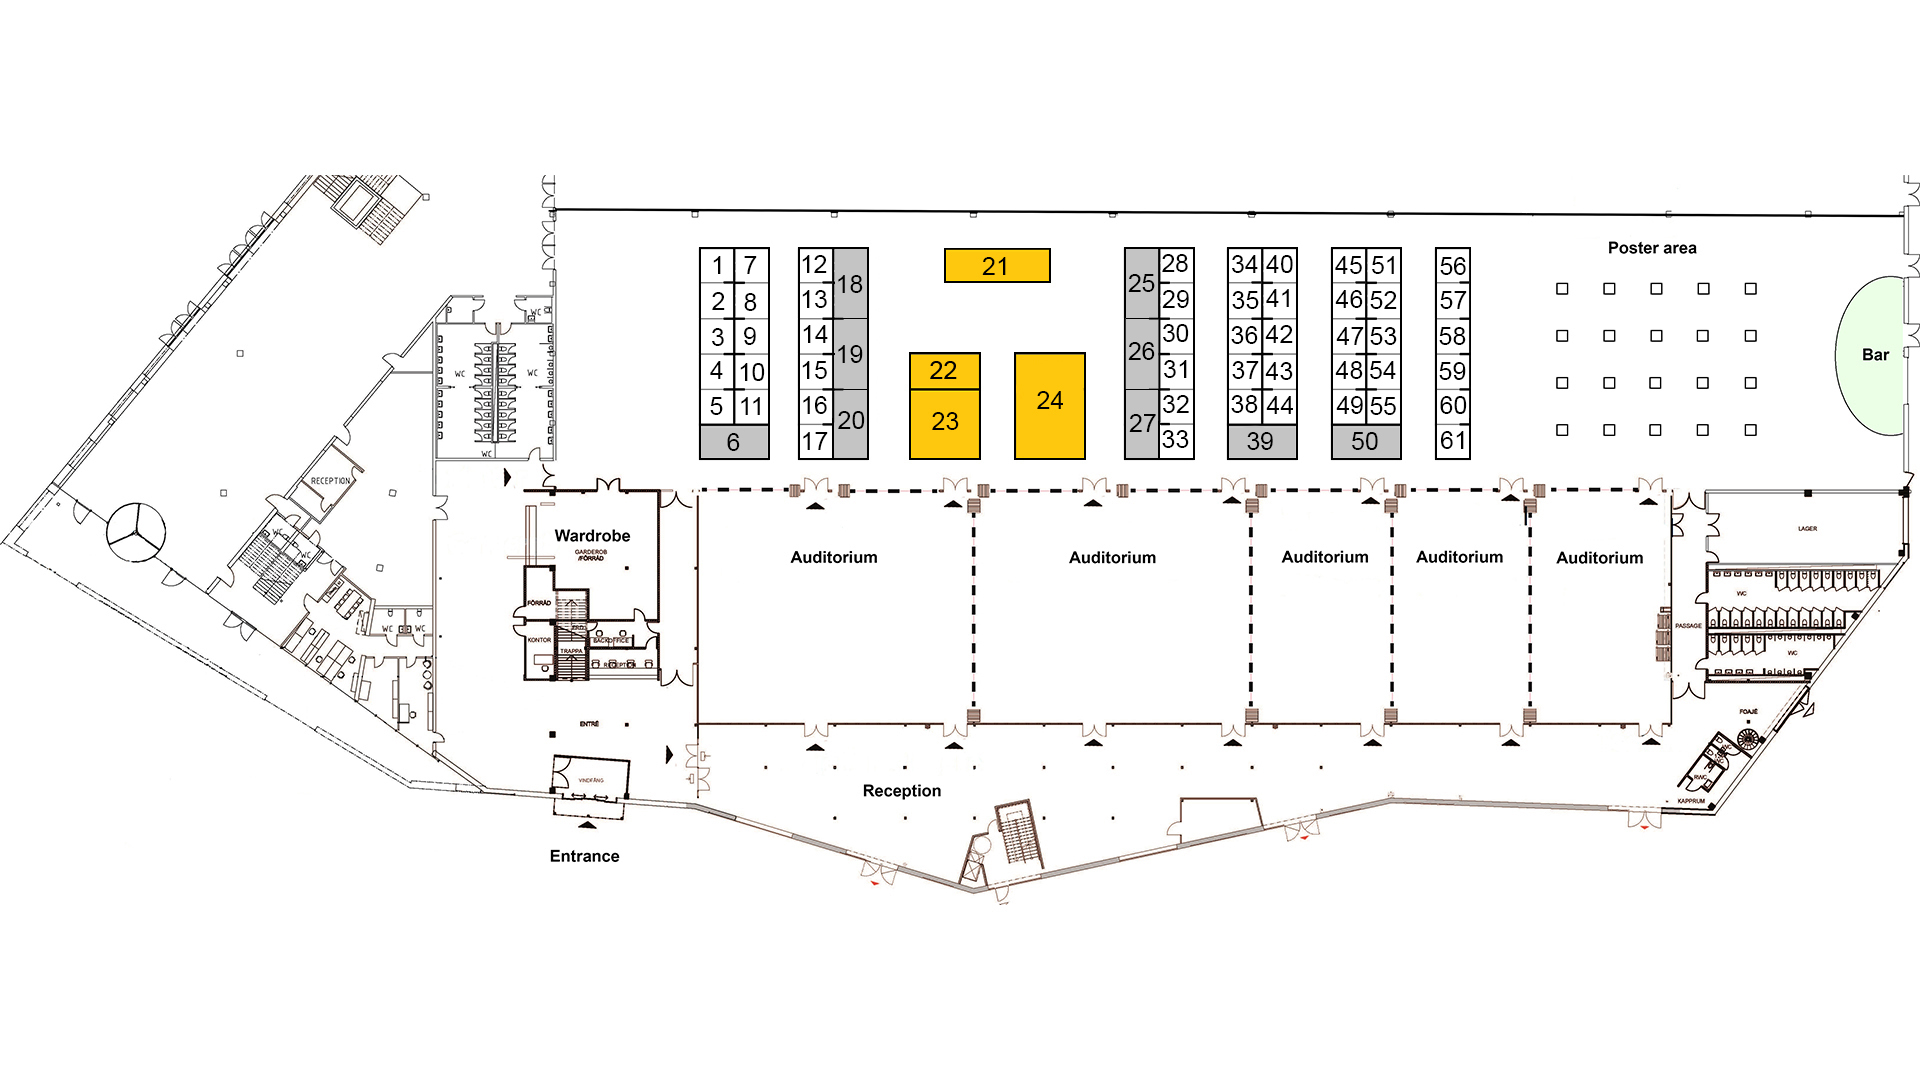 This is the floorplan for the exhibition of CBRNE 2022